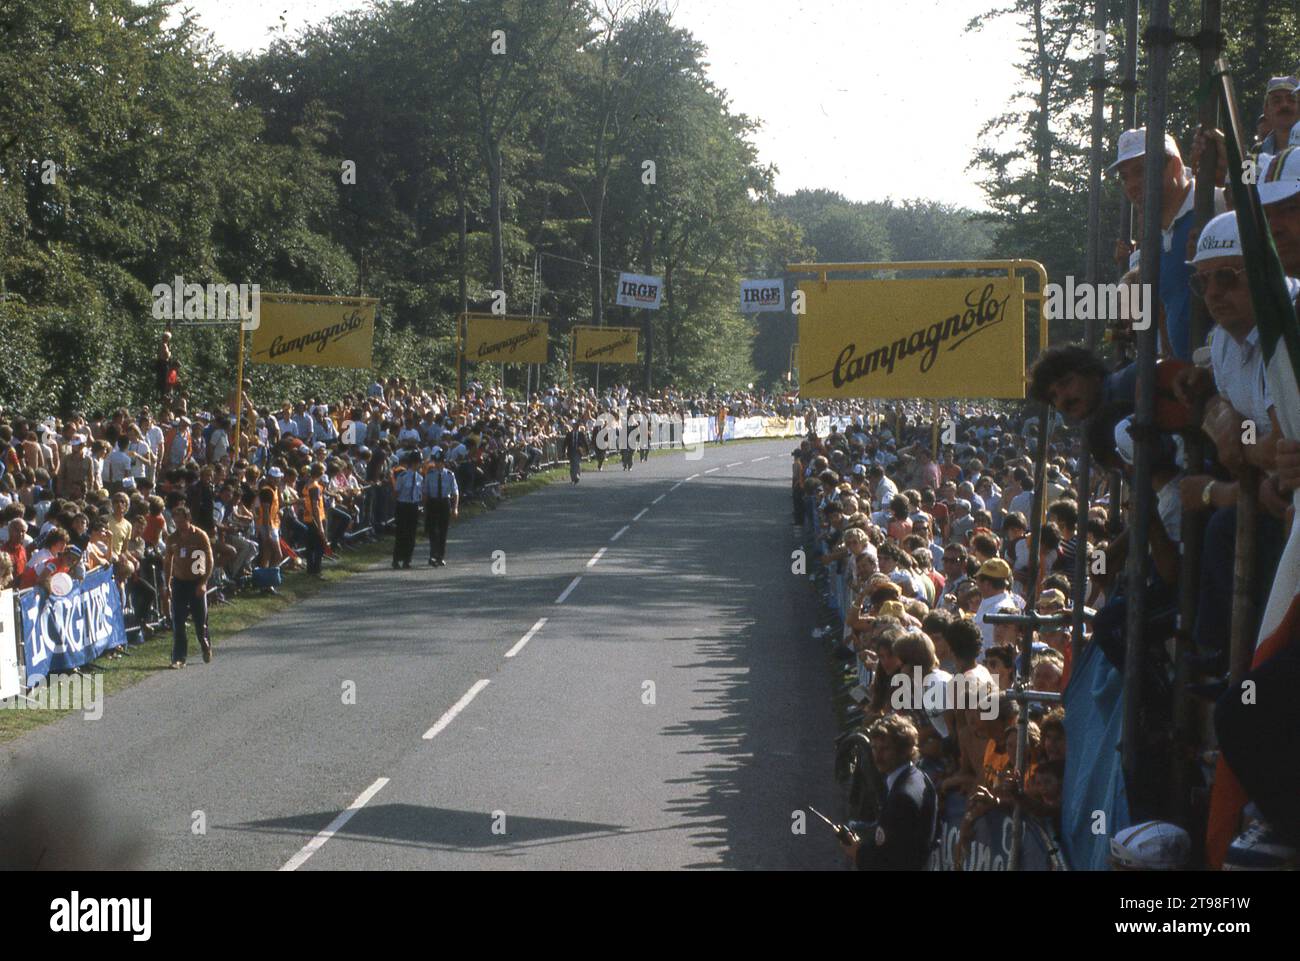 1982, spectators line the finish straight at the UCI World Cycling Championships held at the famous Goodwood motoring circuit, Chichester, West Sussex, England, UK. The exciting race as won by Italian Giuseppe Sarroni, who beat cycling legends, Greg LeMond and Sean Kelly with his final sprint for victory, giving him the nickmane of 'La fulcilata di Goodwood', the gunshot of Goodwood. Mandy Jones of Great Britain won the women's road race. Stock Photo